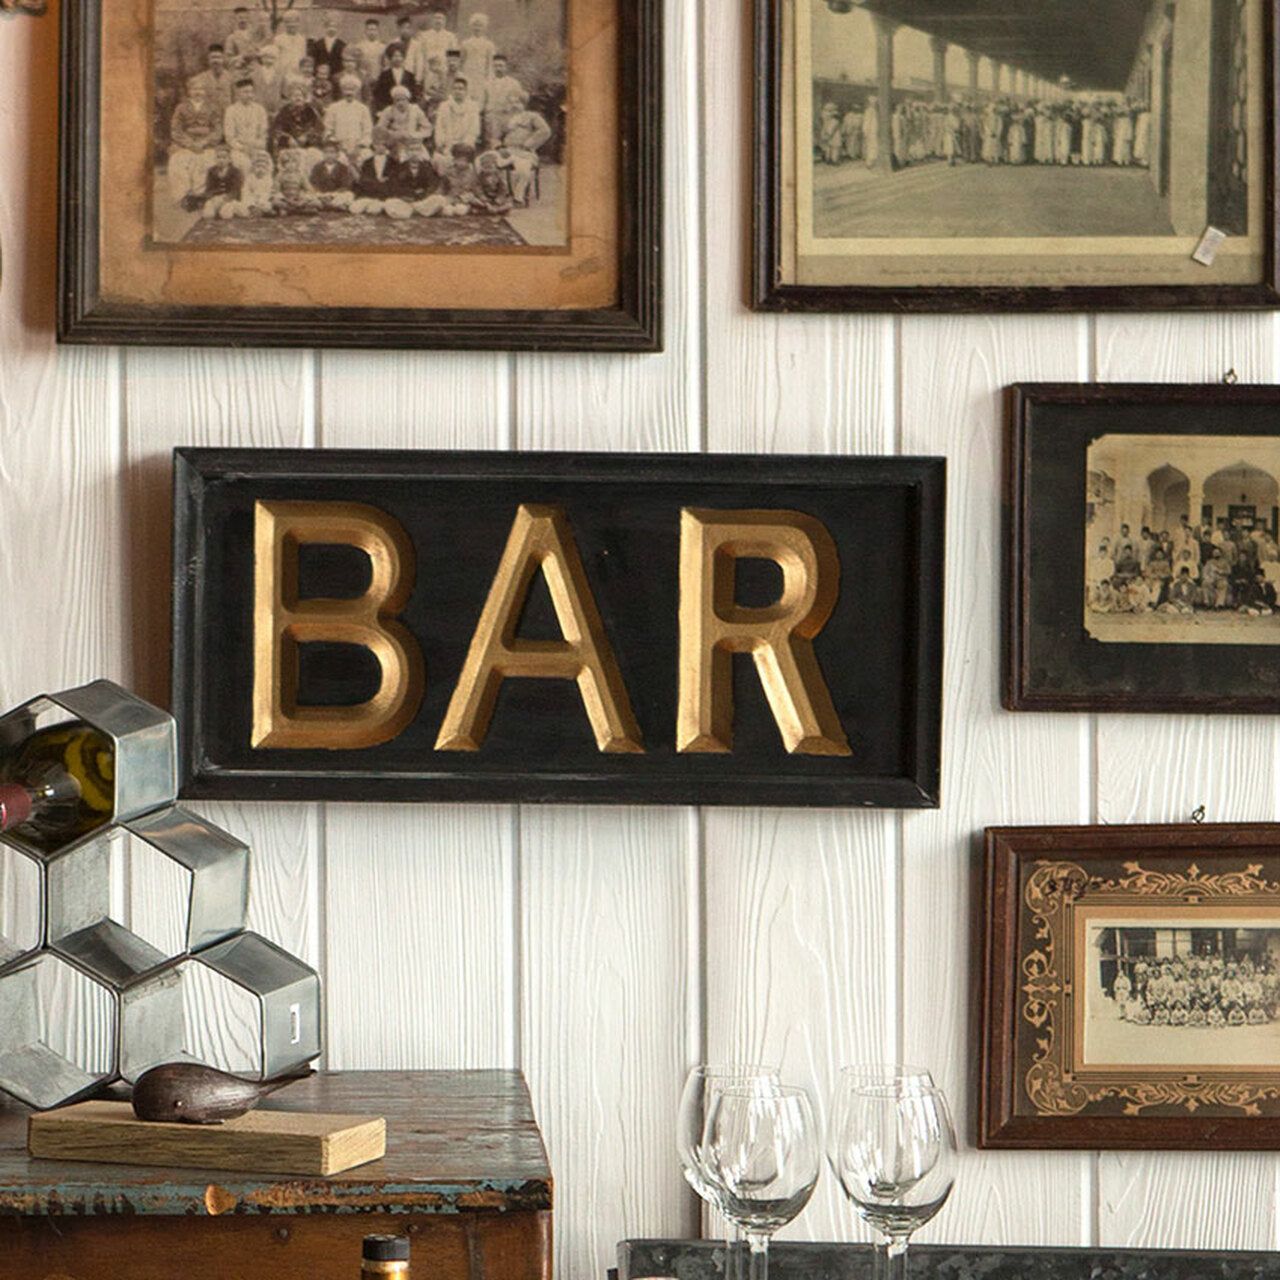 The classic bar sign in Black and Gold.